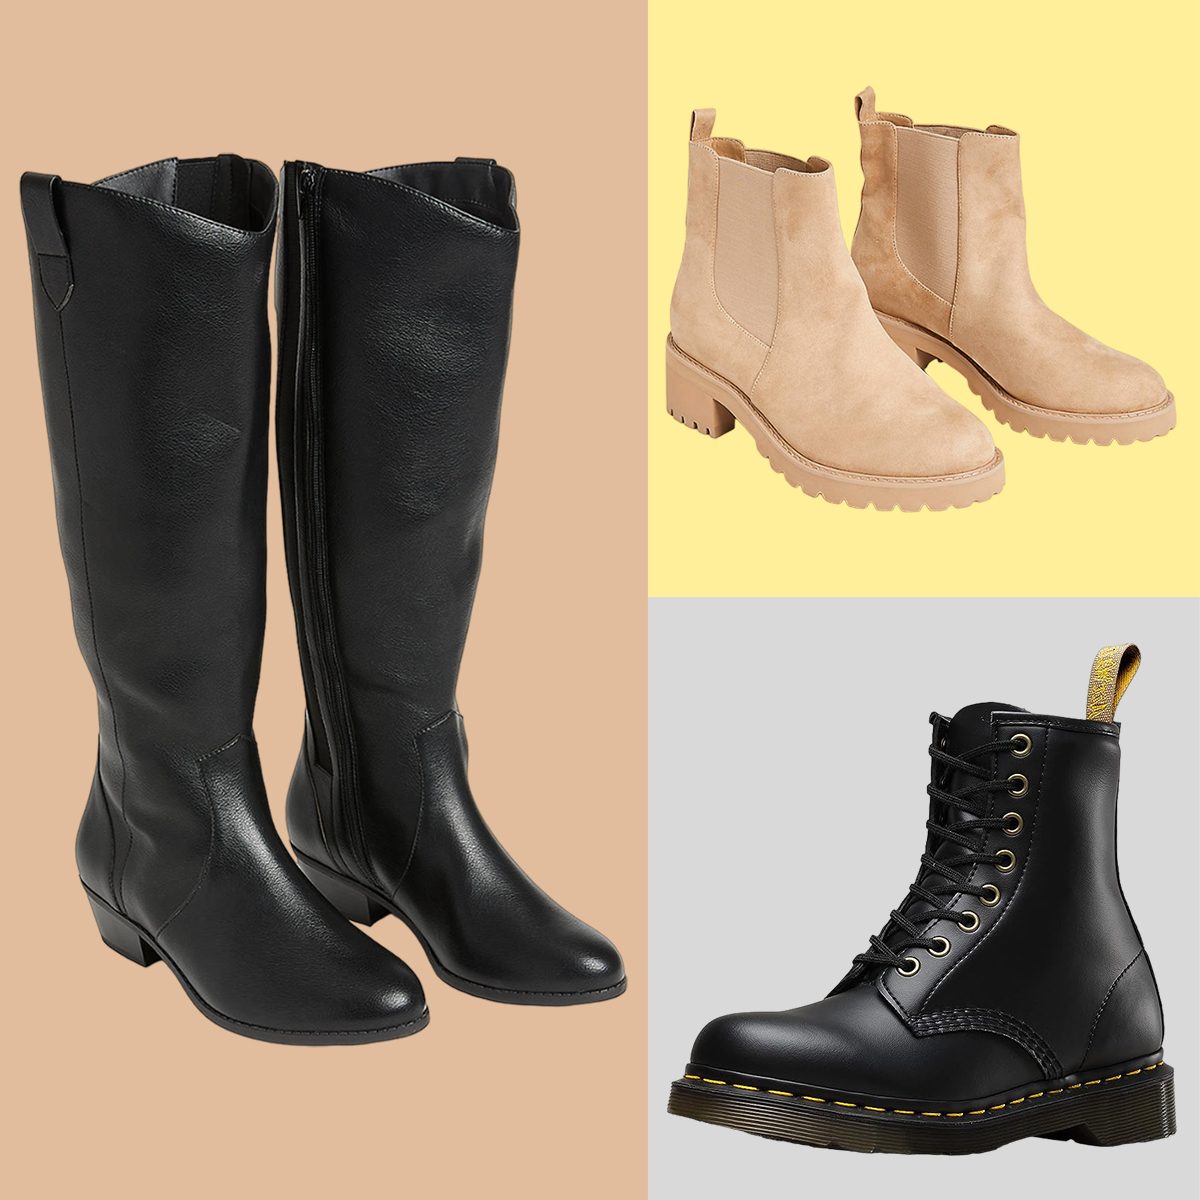 Why Are Plus-Size Boots For Women So Hard To Find?